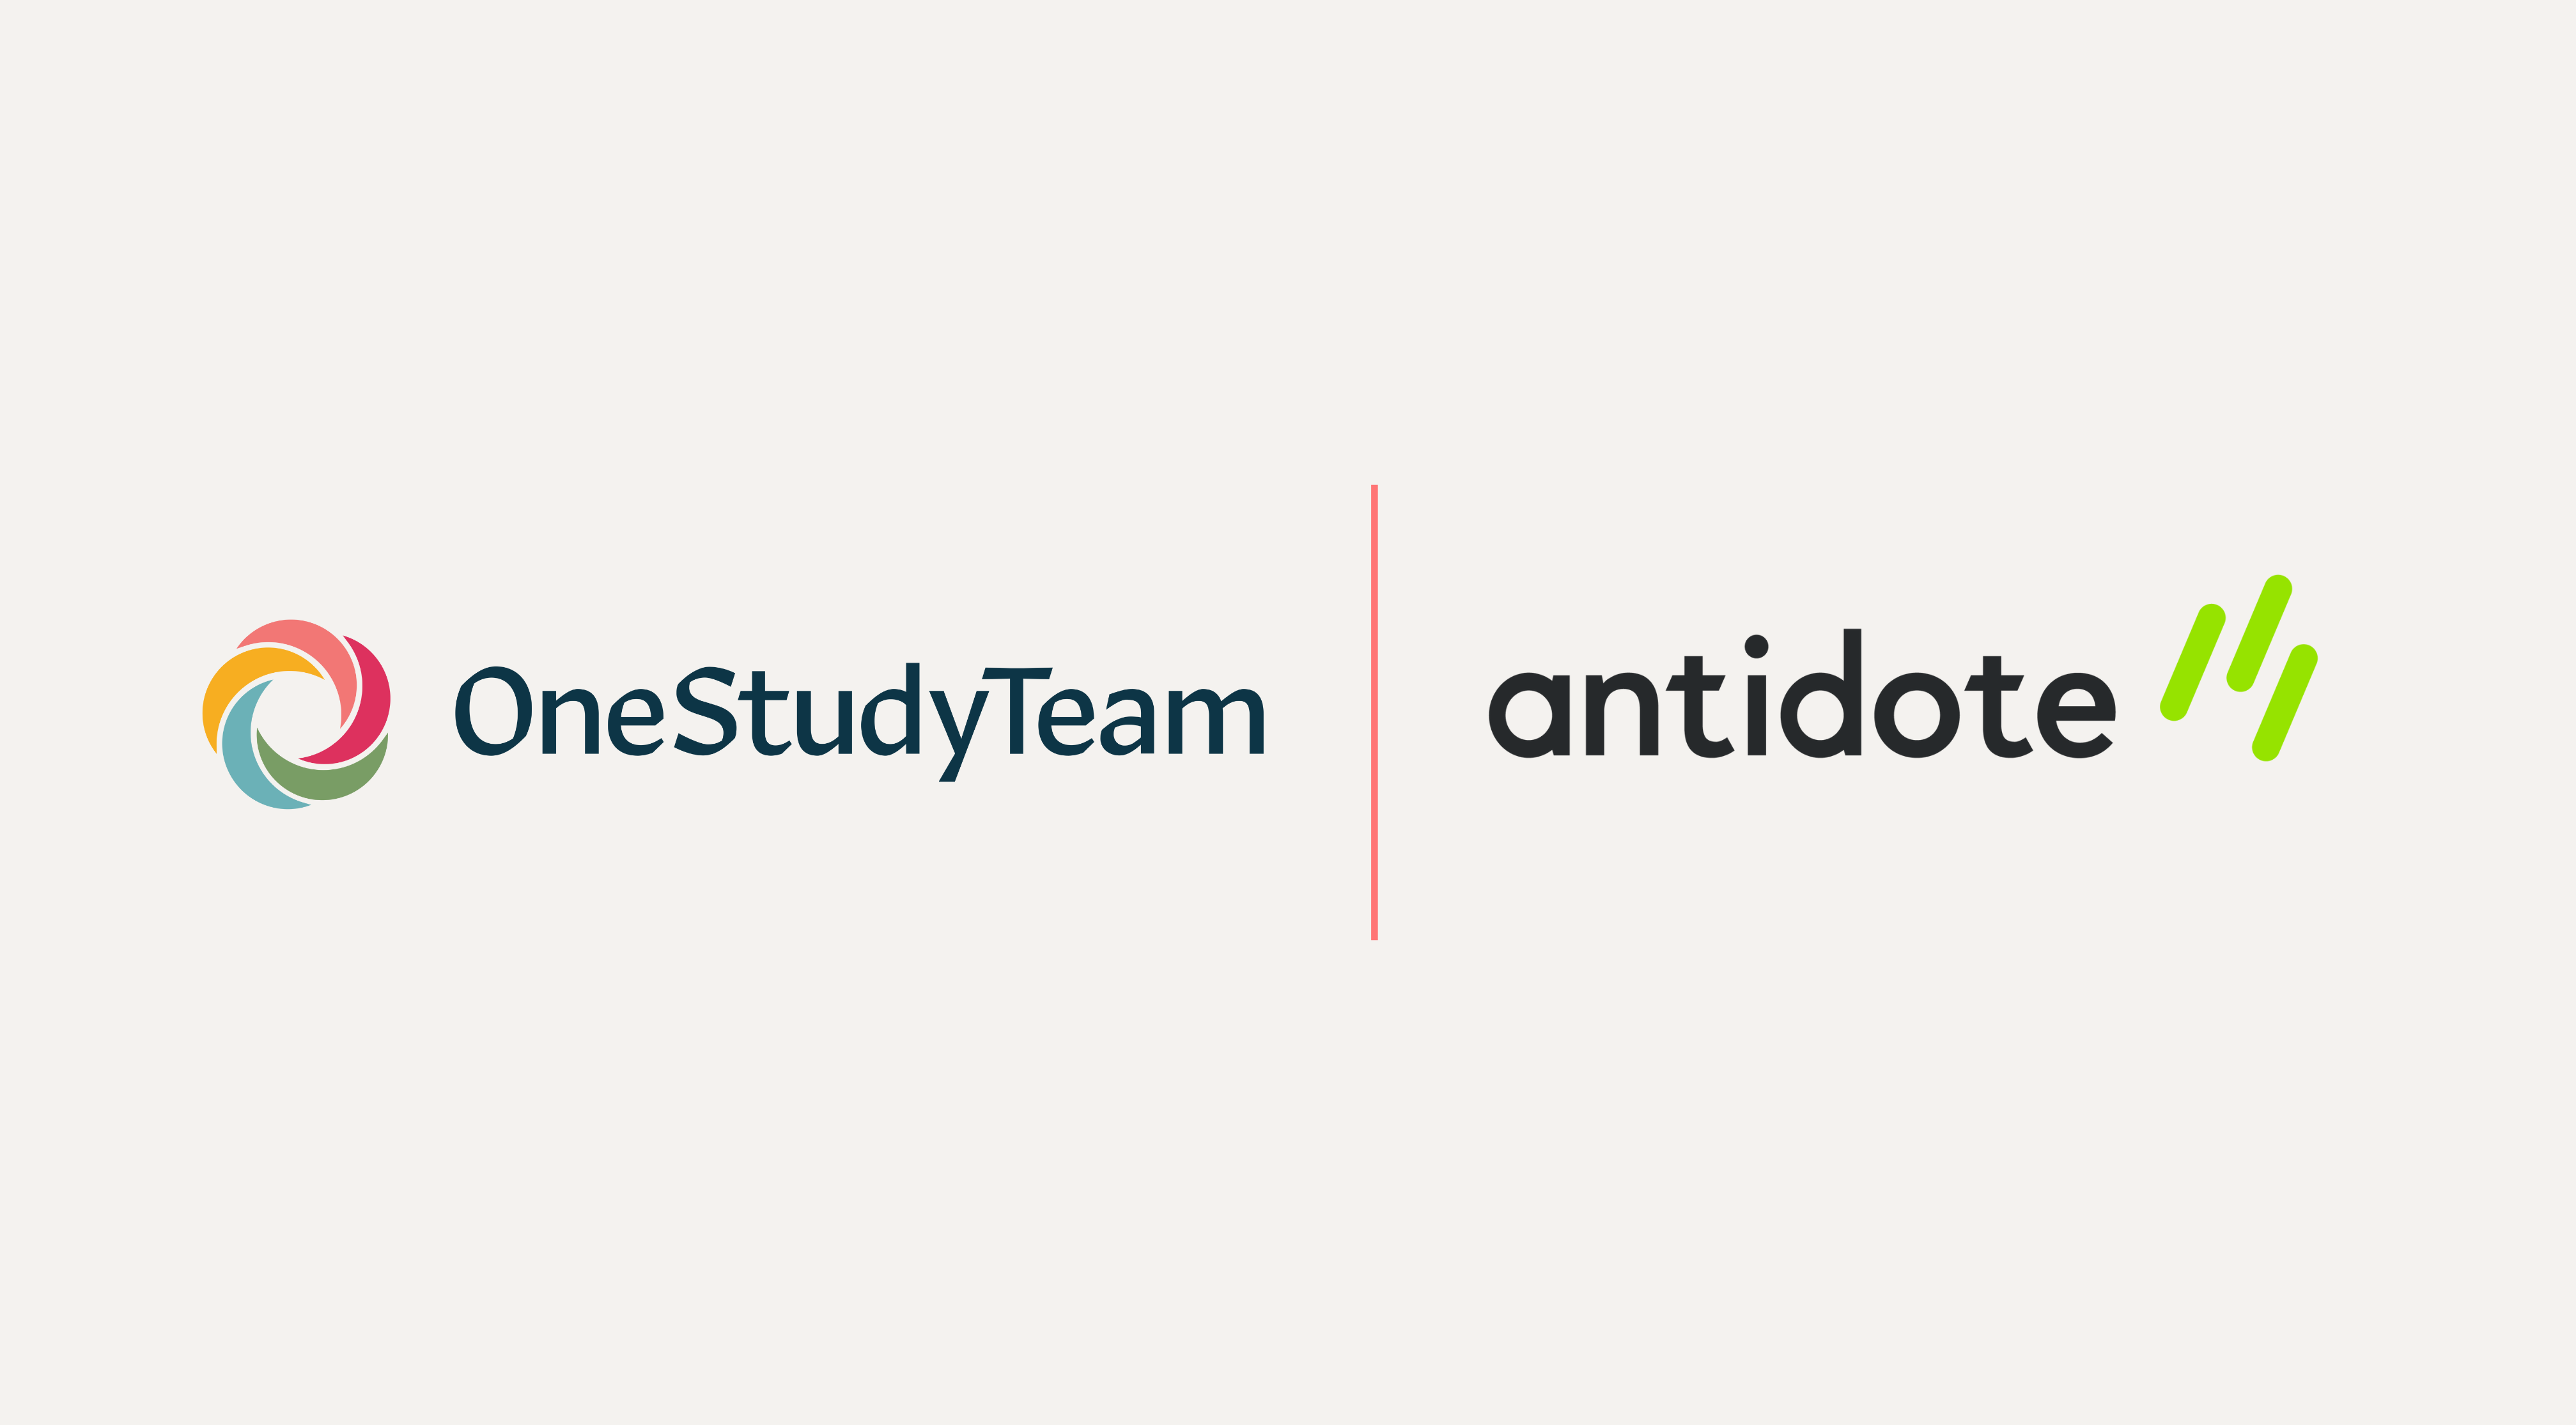 OneStudyTeam and Antidote Partner to Maximize Clinical Trial Recruitment and Enrollment